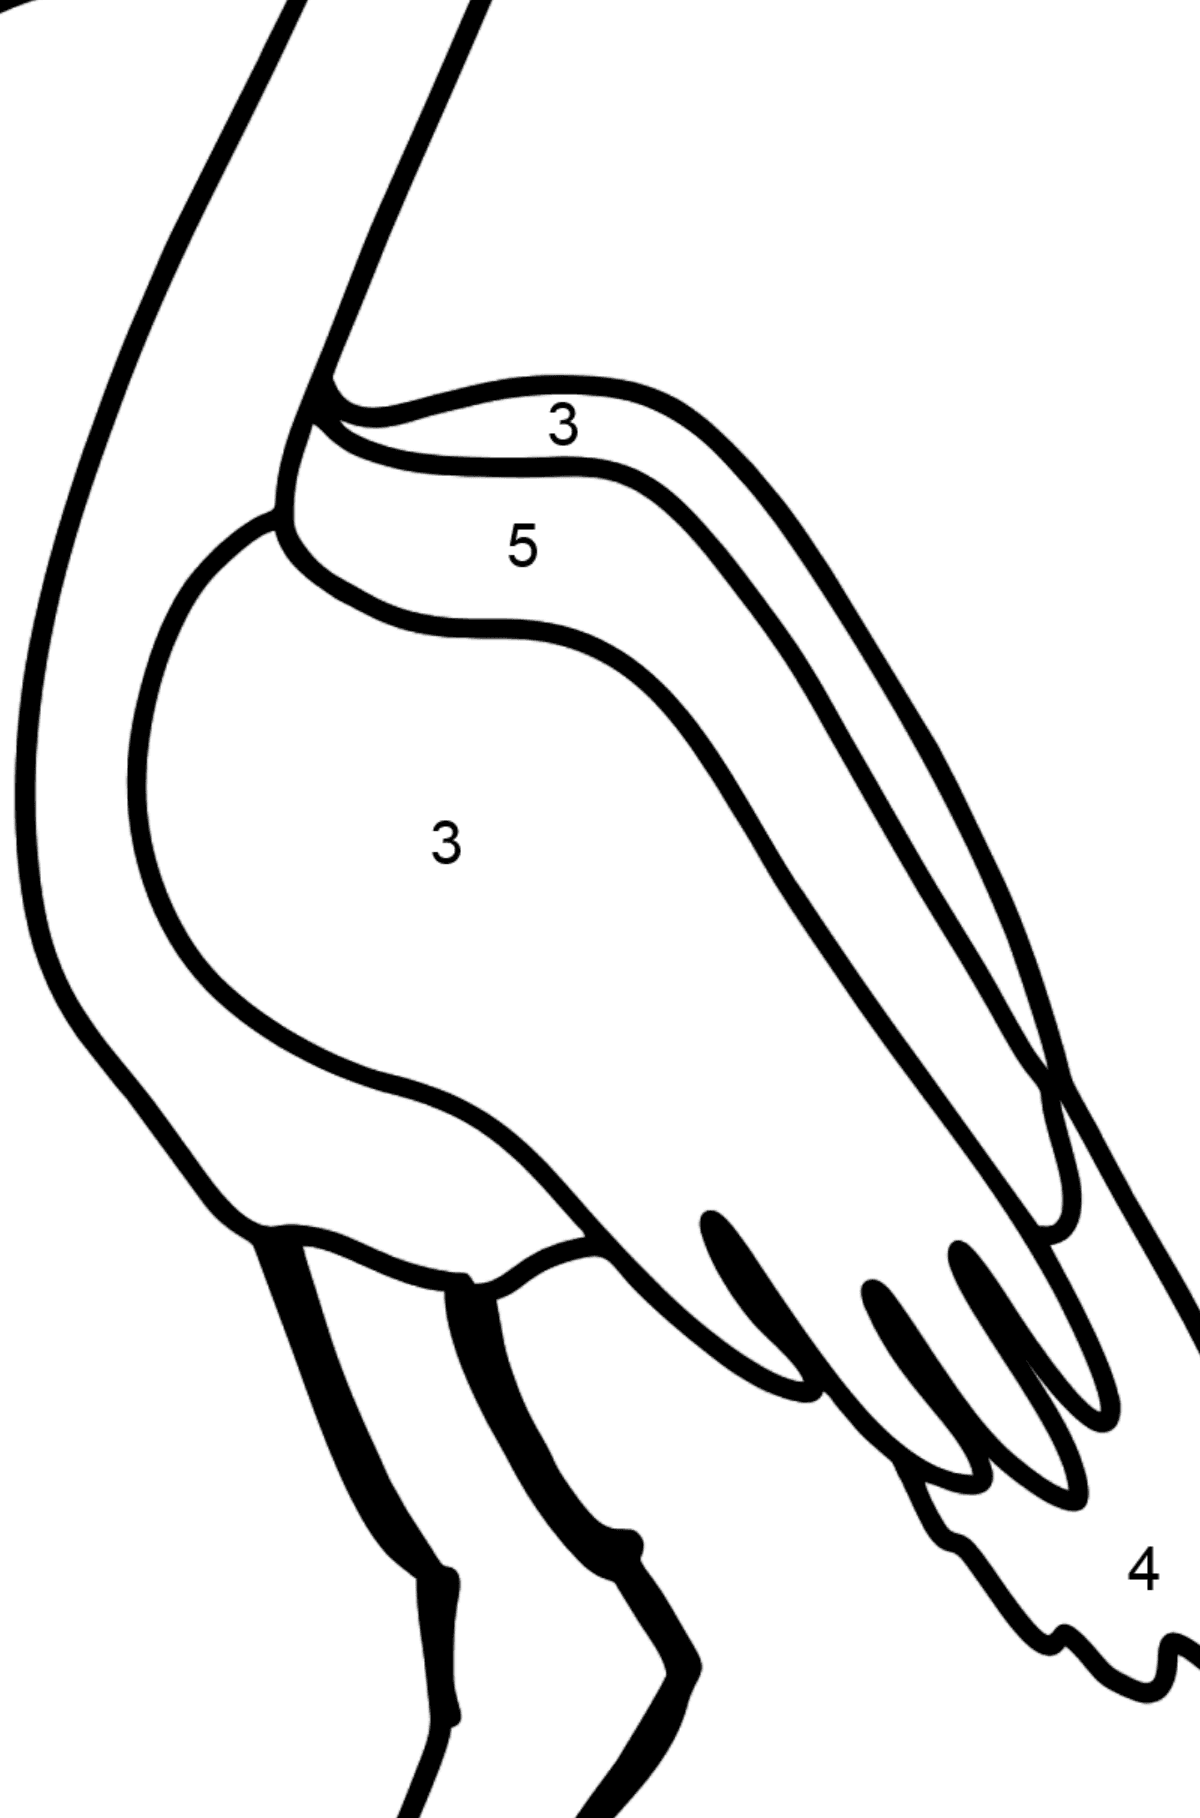 Simple coloring page with a stork  - Coloring by Numbers for Kids